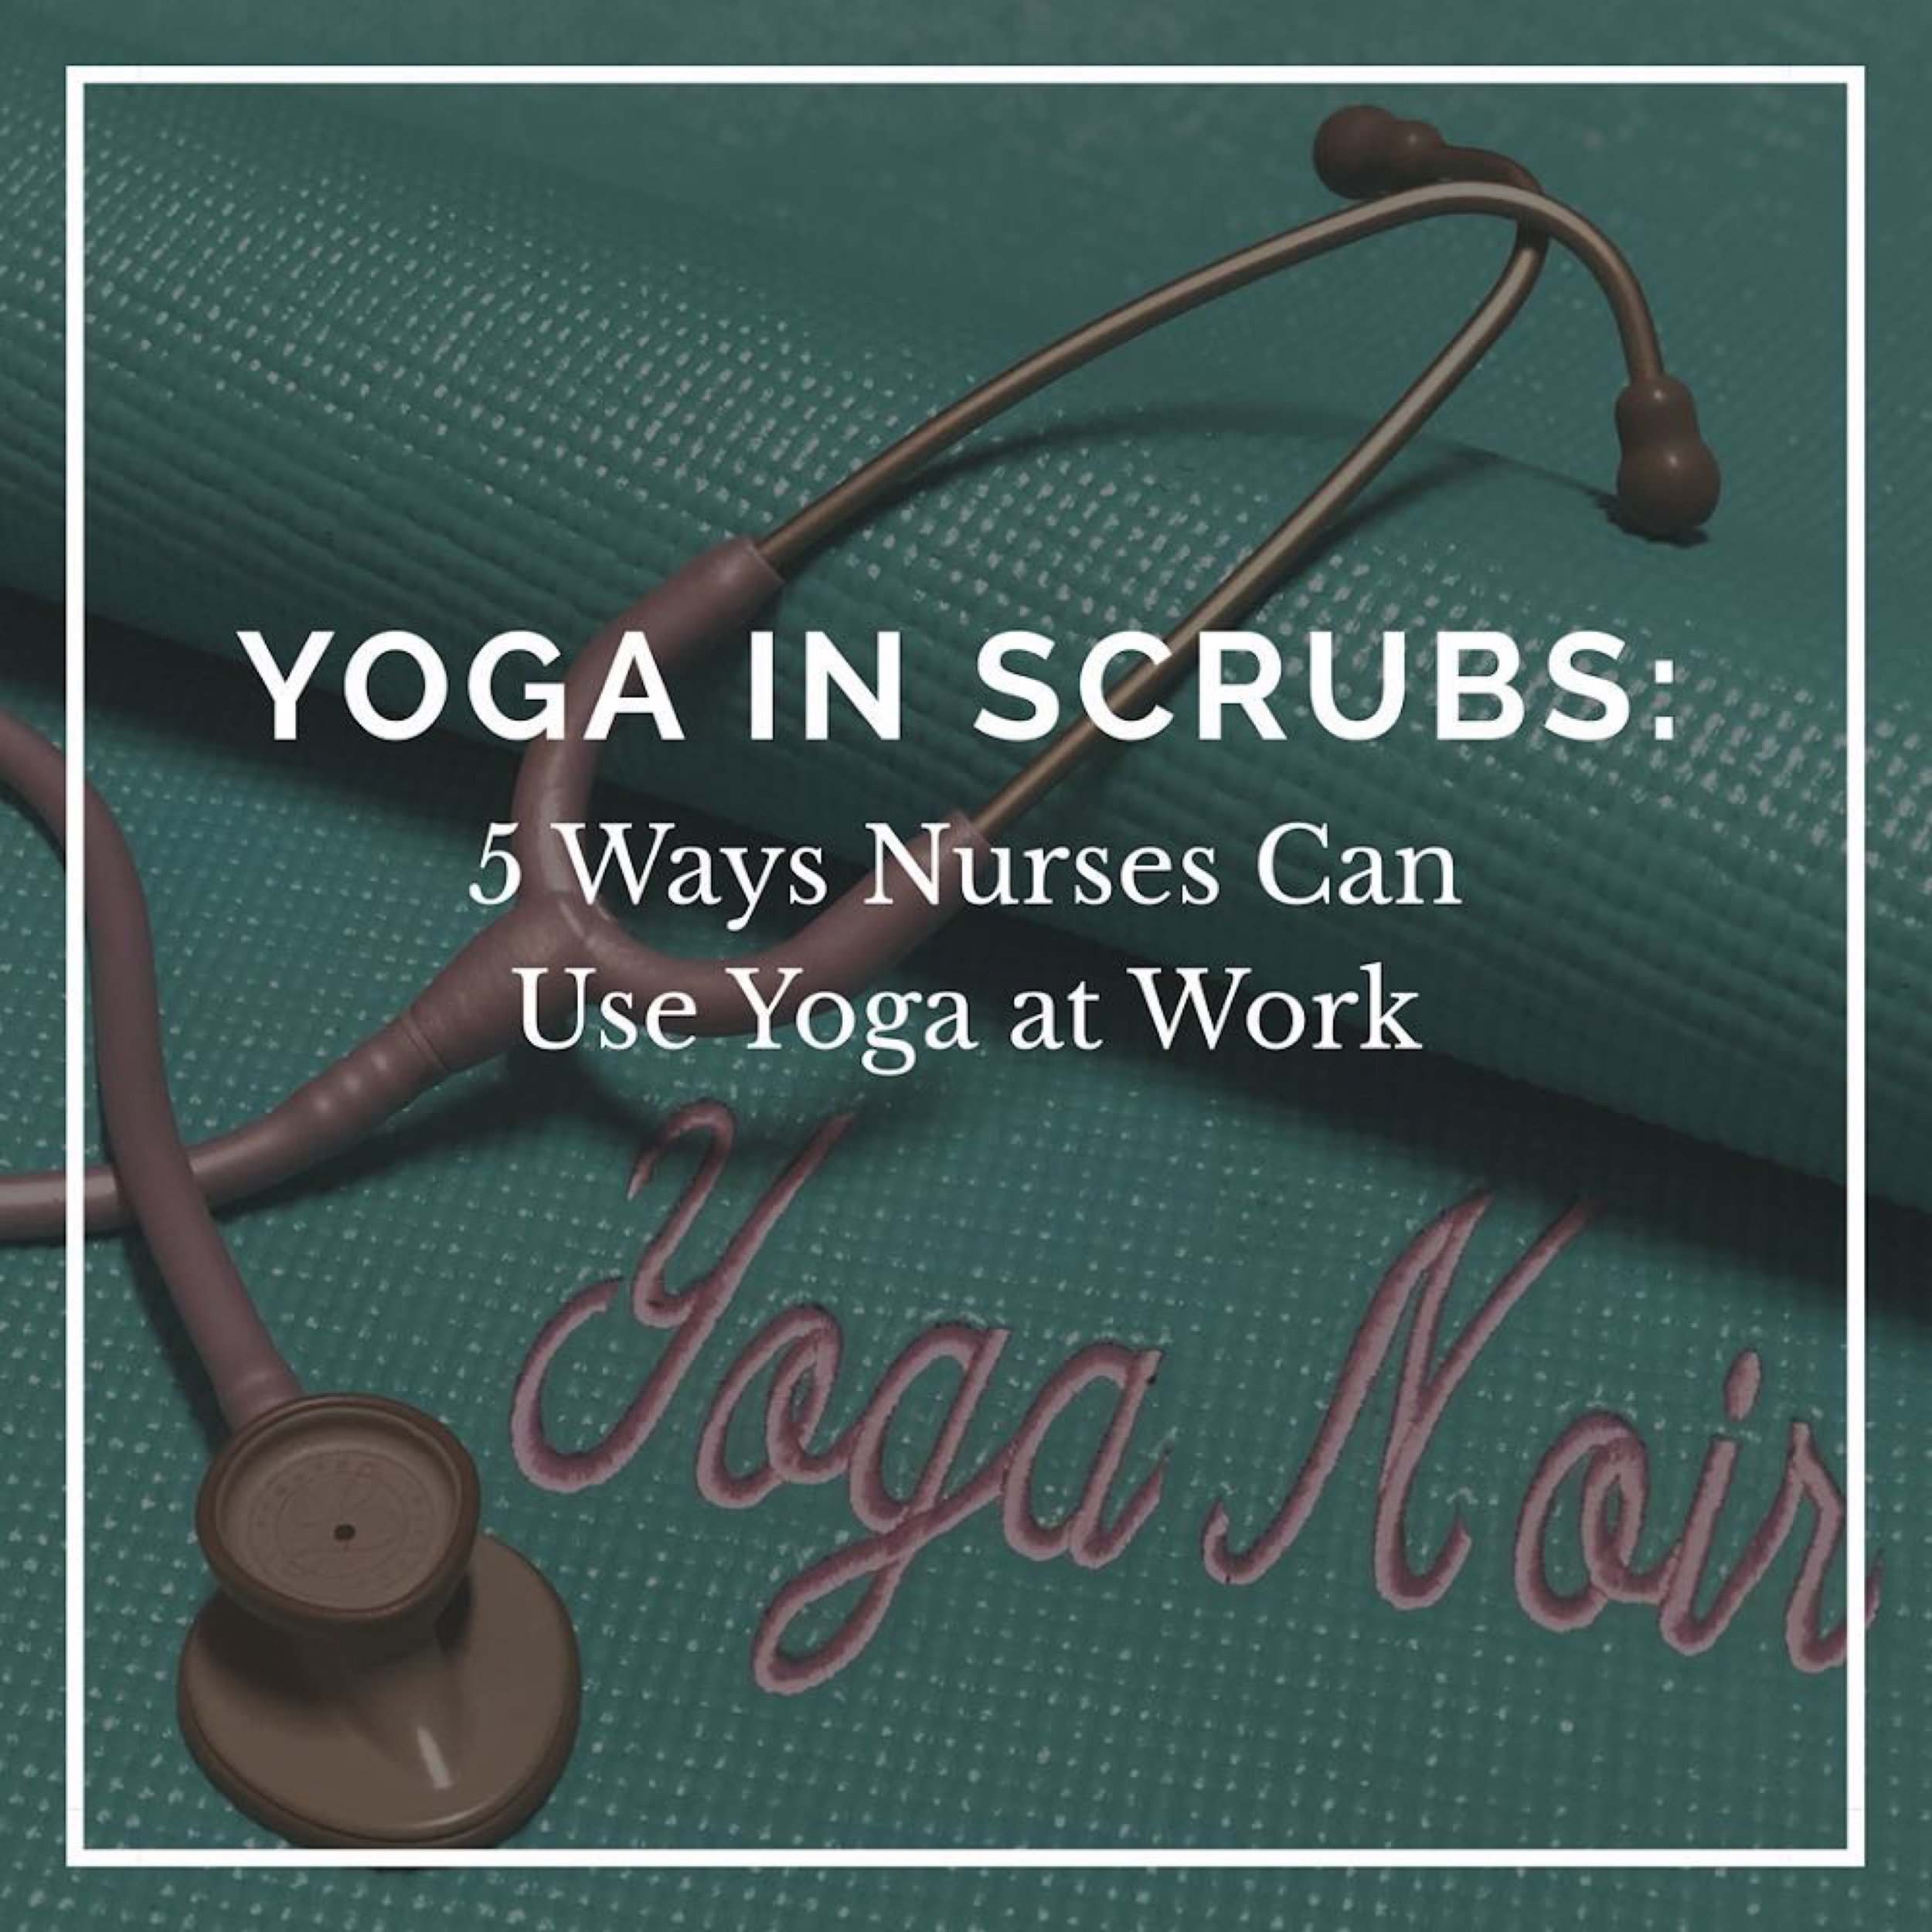 Yoga in Scrubs: 5 Ways that Nurses Can Benefit from Yoga at Work